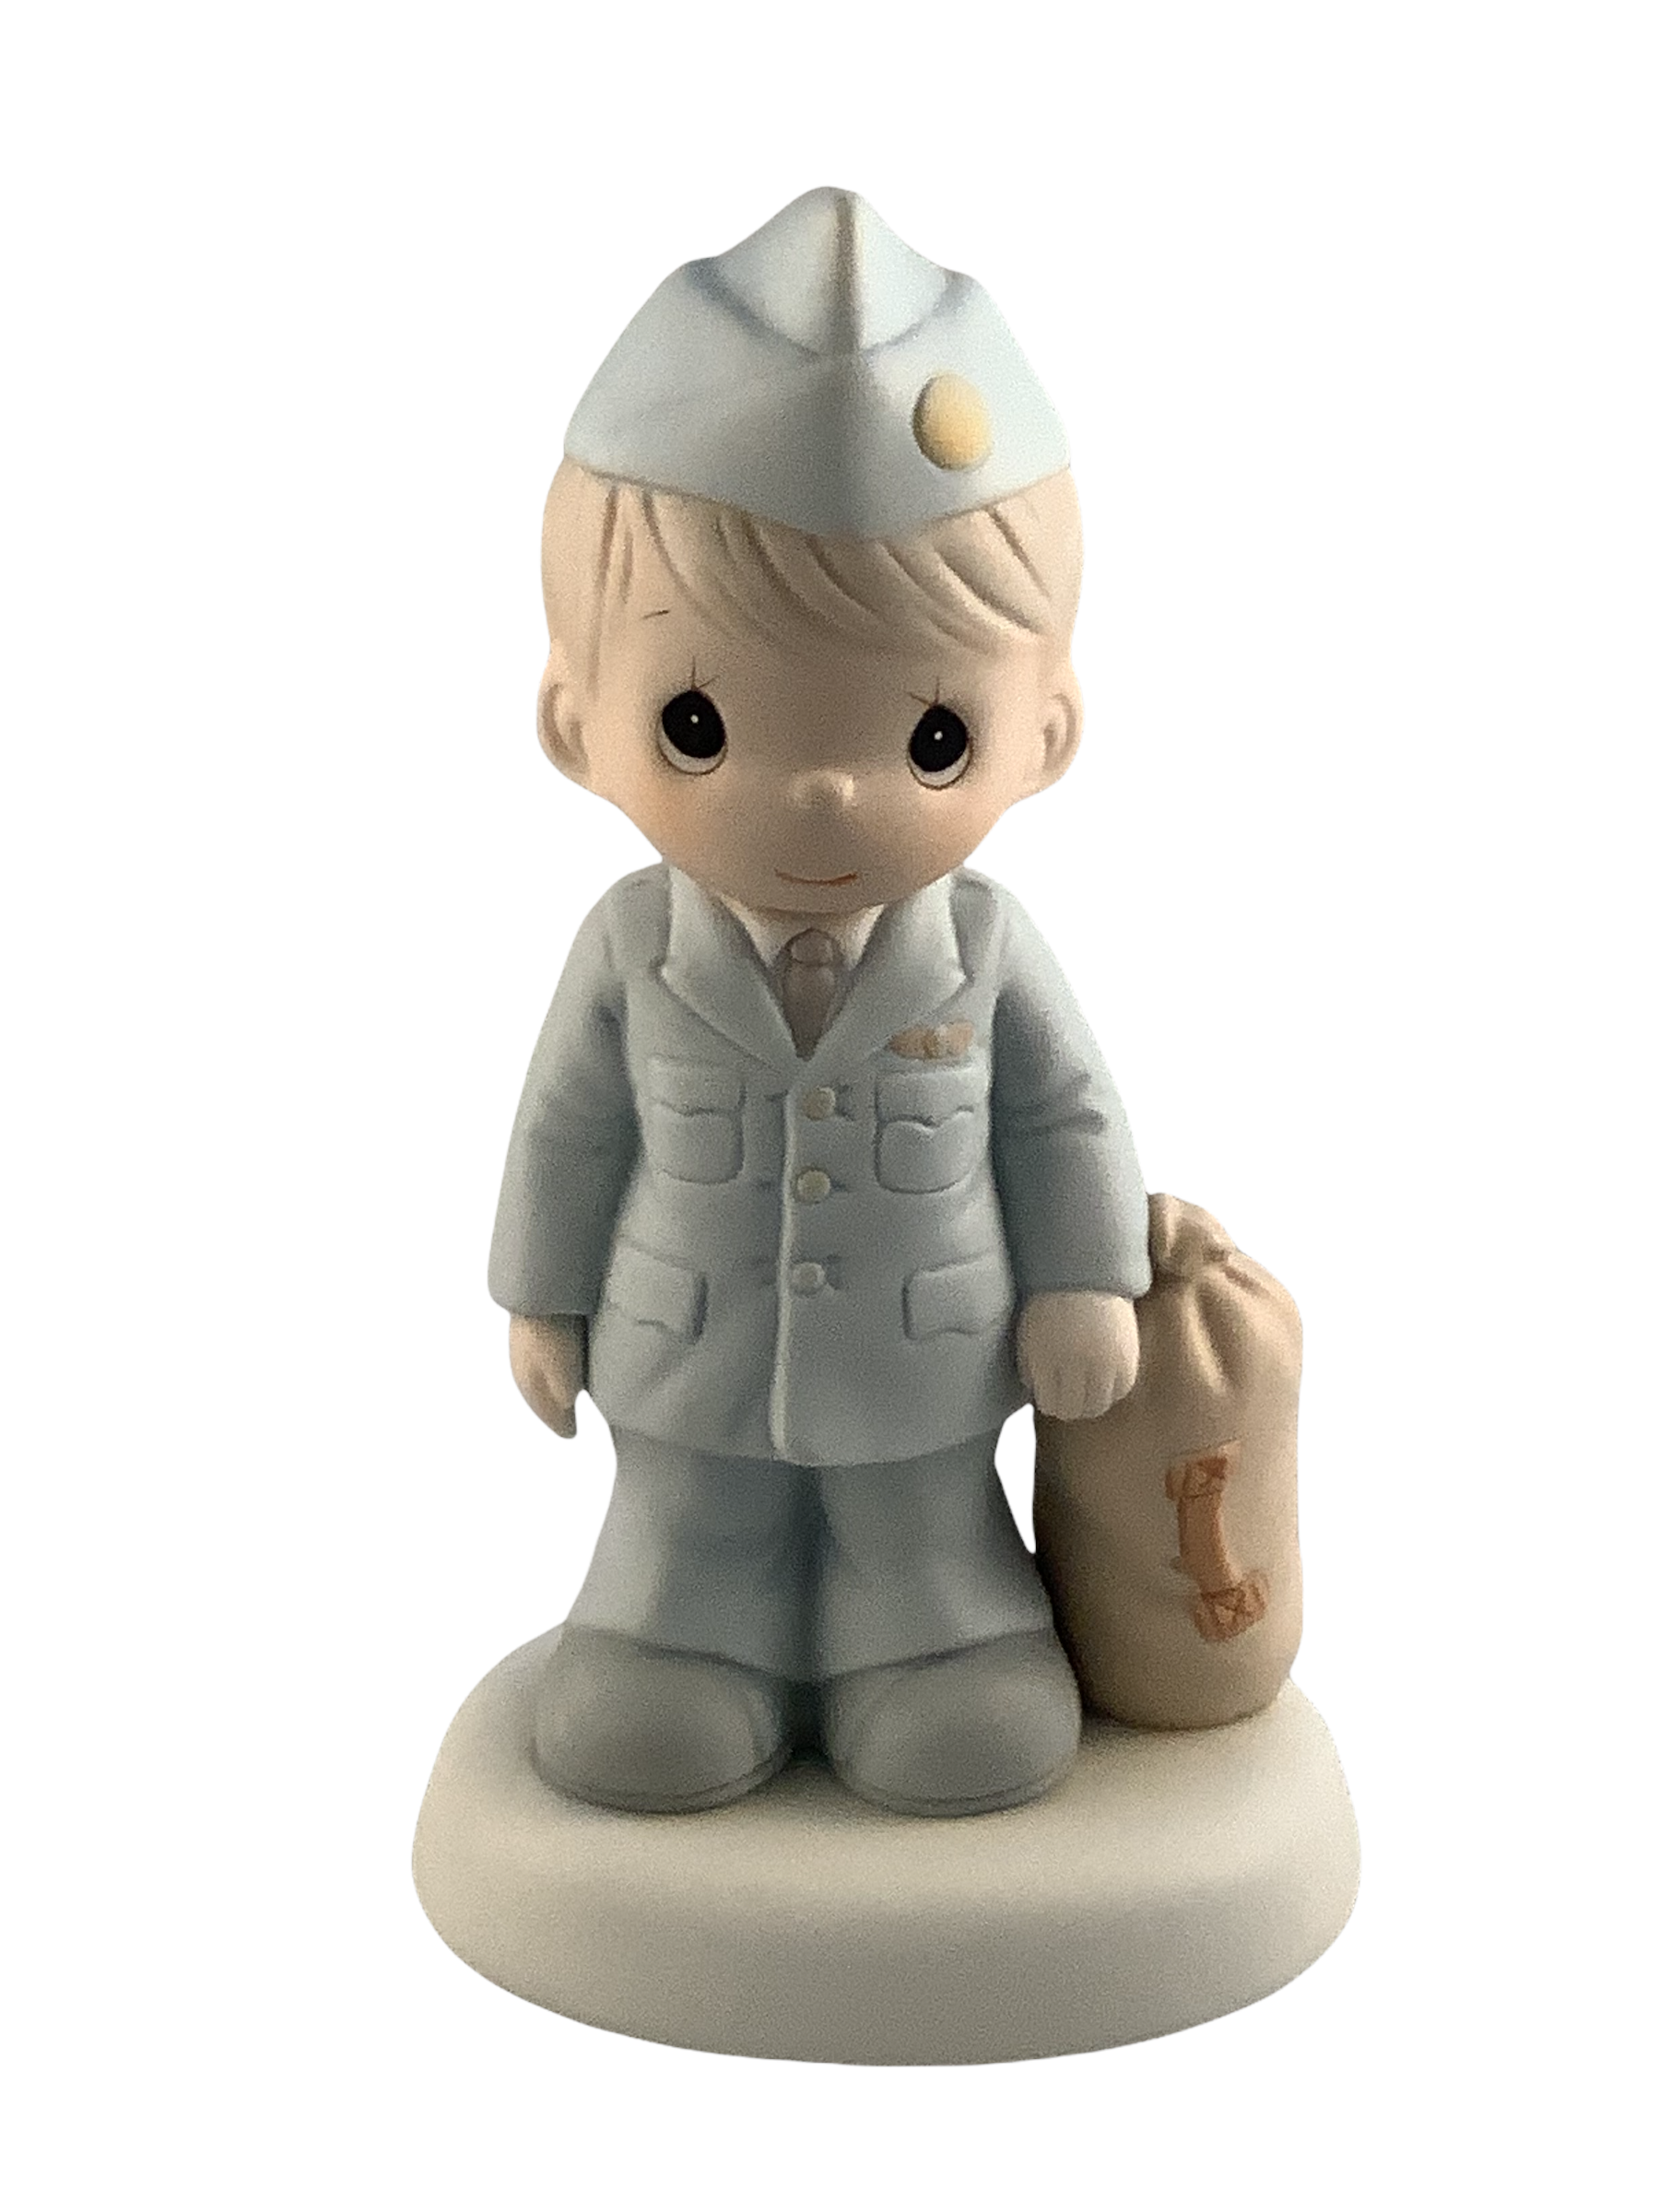 Bless Those Who Serve Their Country - Air Force- Precious Moment Figurine